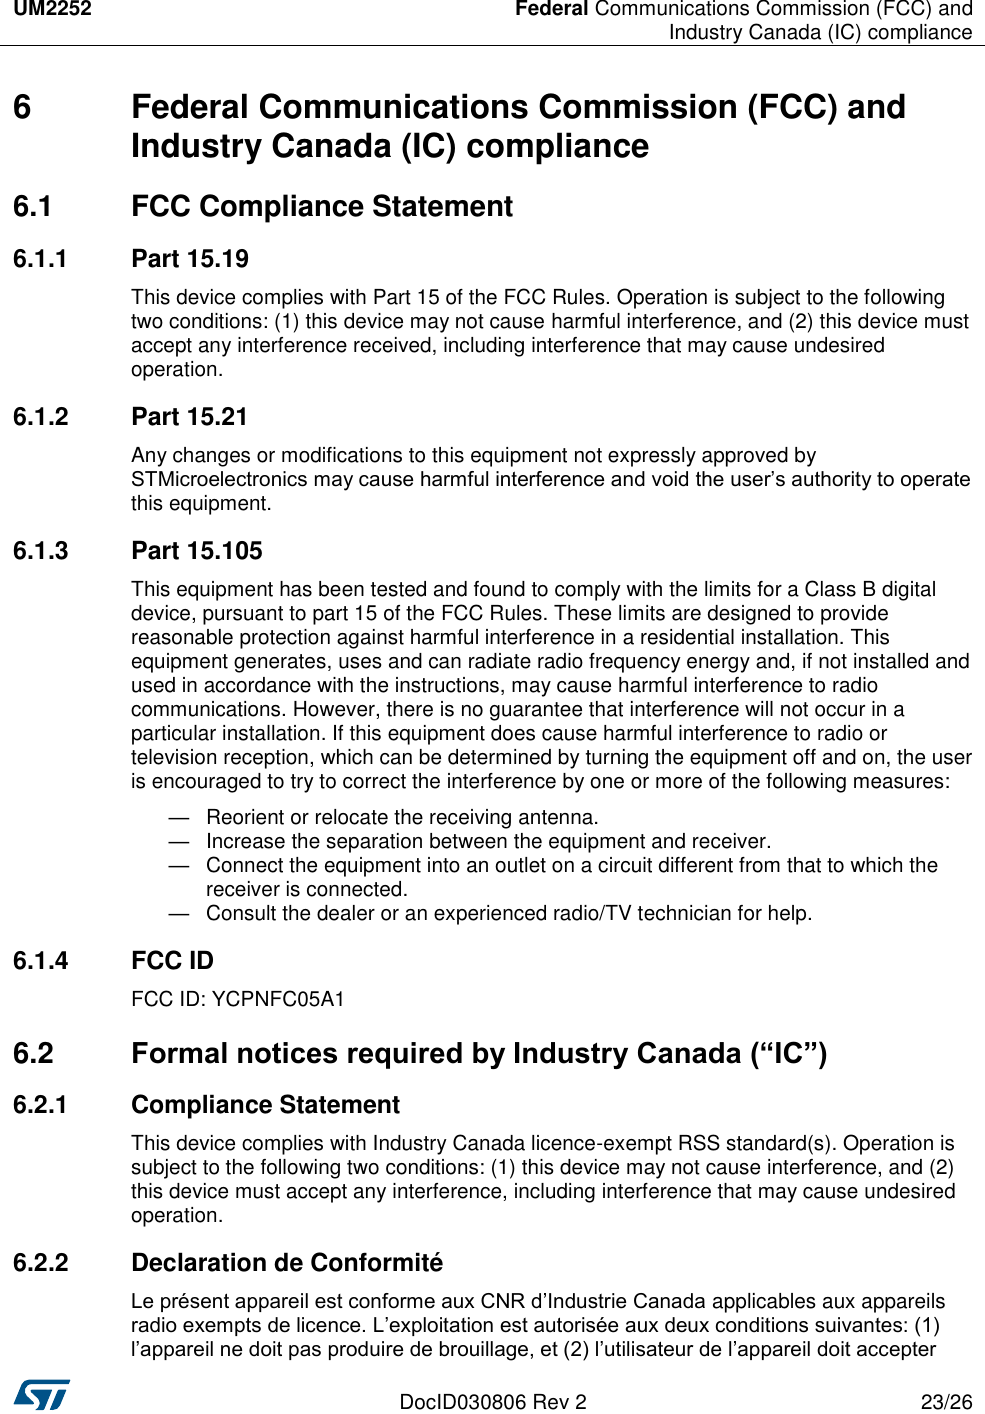 UM2252 Federal Communications Commission (FCC) and Industry Canada (IC) compliance DocID030806 Rev 2 23/26 6  Federal Communications Commission (FCC) and Industry Canada (IC) compliance 6.1  FCC Compliance Statement 6.1.1  Part 15.19 This device complies with Part 15 of the FCC Rules. Operation is subject to the following two conditions: (1) this device may not cause harmful interference, and (2) this device must accept any interference received, including interference that may cause undesired operation. 6.1.2  Part 15.21 Any changes or modifications to this equipment not expressly approved by STMicroelectronics may cause harmful interference and void the user’s authority to operate this equipment. 6.1.3  Part 15.105 This equipment has been tested and found to comply with the limits for a Class B digital device, pursuant to part 15 of the FCC Rules. These limits are designed to provide reasonable protection against harmful interference in a residential installation. This equipment generates, uses and can radiate radio frequency energy and, if not installed and used in accordance with the instructions, may cause harmful interference to radio communications. However, there is no guarantee that interference will not occur in a particular installation. If this equipment does cause harmful interference to radio or television reception, which can be determined by turning the equipment off and on, the user is encouraged to try to correct the interference by one or more of the following measures:  —  Reorient or relocate the receiving antenna. —  Increase the separation between the equipment and receiver. —  Connect the equipment into an outlet on a circuit different from that to which the receiver is connected. —  Consult the dealer or an experienced radio/TV technician for help. 6.1.4  FCC ID FCC ID: YCPNFC05A1 6.2  Formal notices required by Industry Canada (“IC”) 6.2.1  Compliance Statement This device complies with Industry Canada licence-exempt RSS standard(s). Operation is subject to the following two conditions: (1) this device may not cause interference, and (2) this device must accept any interference, including interference that may cause undesired operation. 6.2.2  Declaration de Conformité Le présent appareil est conforme aux CNR d’Industrie Canada applicables aux appareils radio exempts de licence. L’exploitation est autorisée aux deux conditions suivantes: (1) l’appareil ne doit pas produire de brouillage, et (2) l’utilisateur de l’appareil doit accepter 